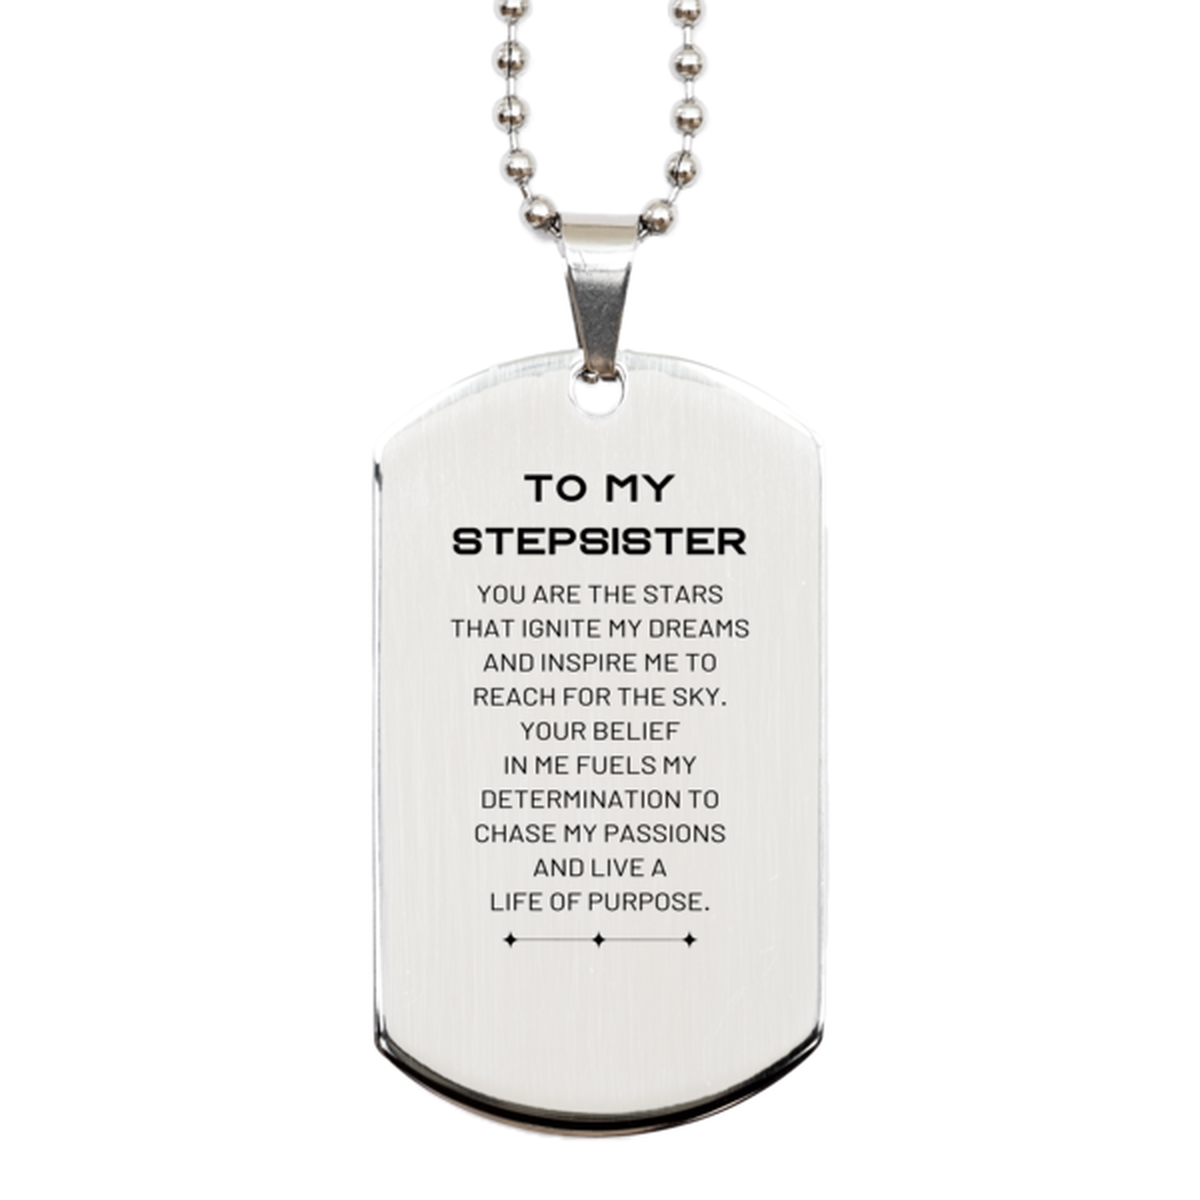 To My Stepsister Silver Dog Tag, You are the stars that ignite my dreams and inspire me to reach for the sky, Birthday Unique Gifts For Stepsister, Thank You Gifts For Stepsister